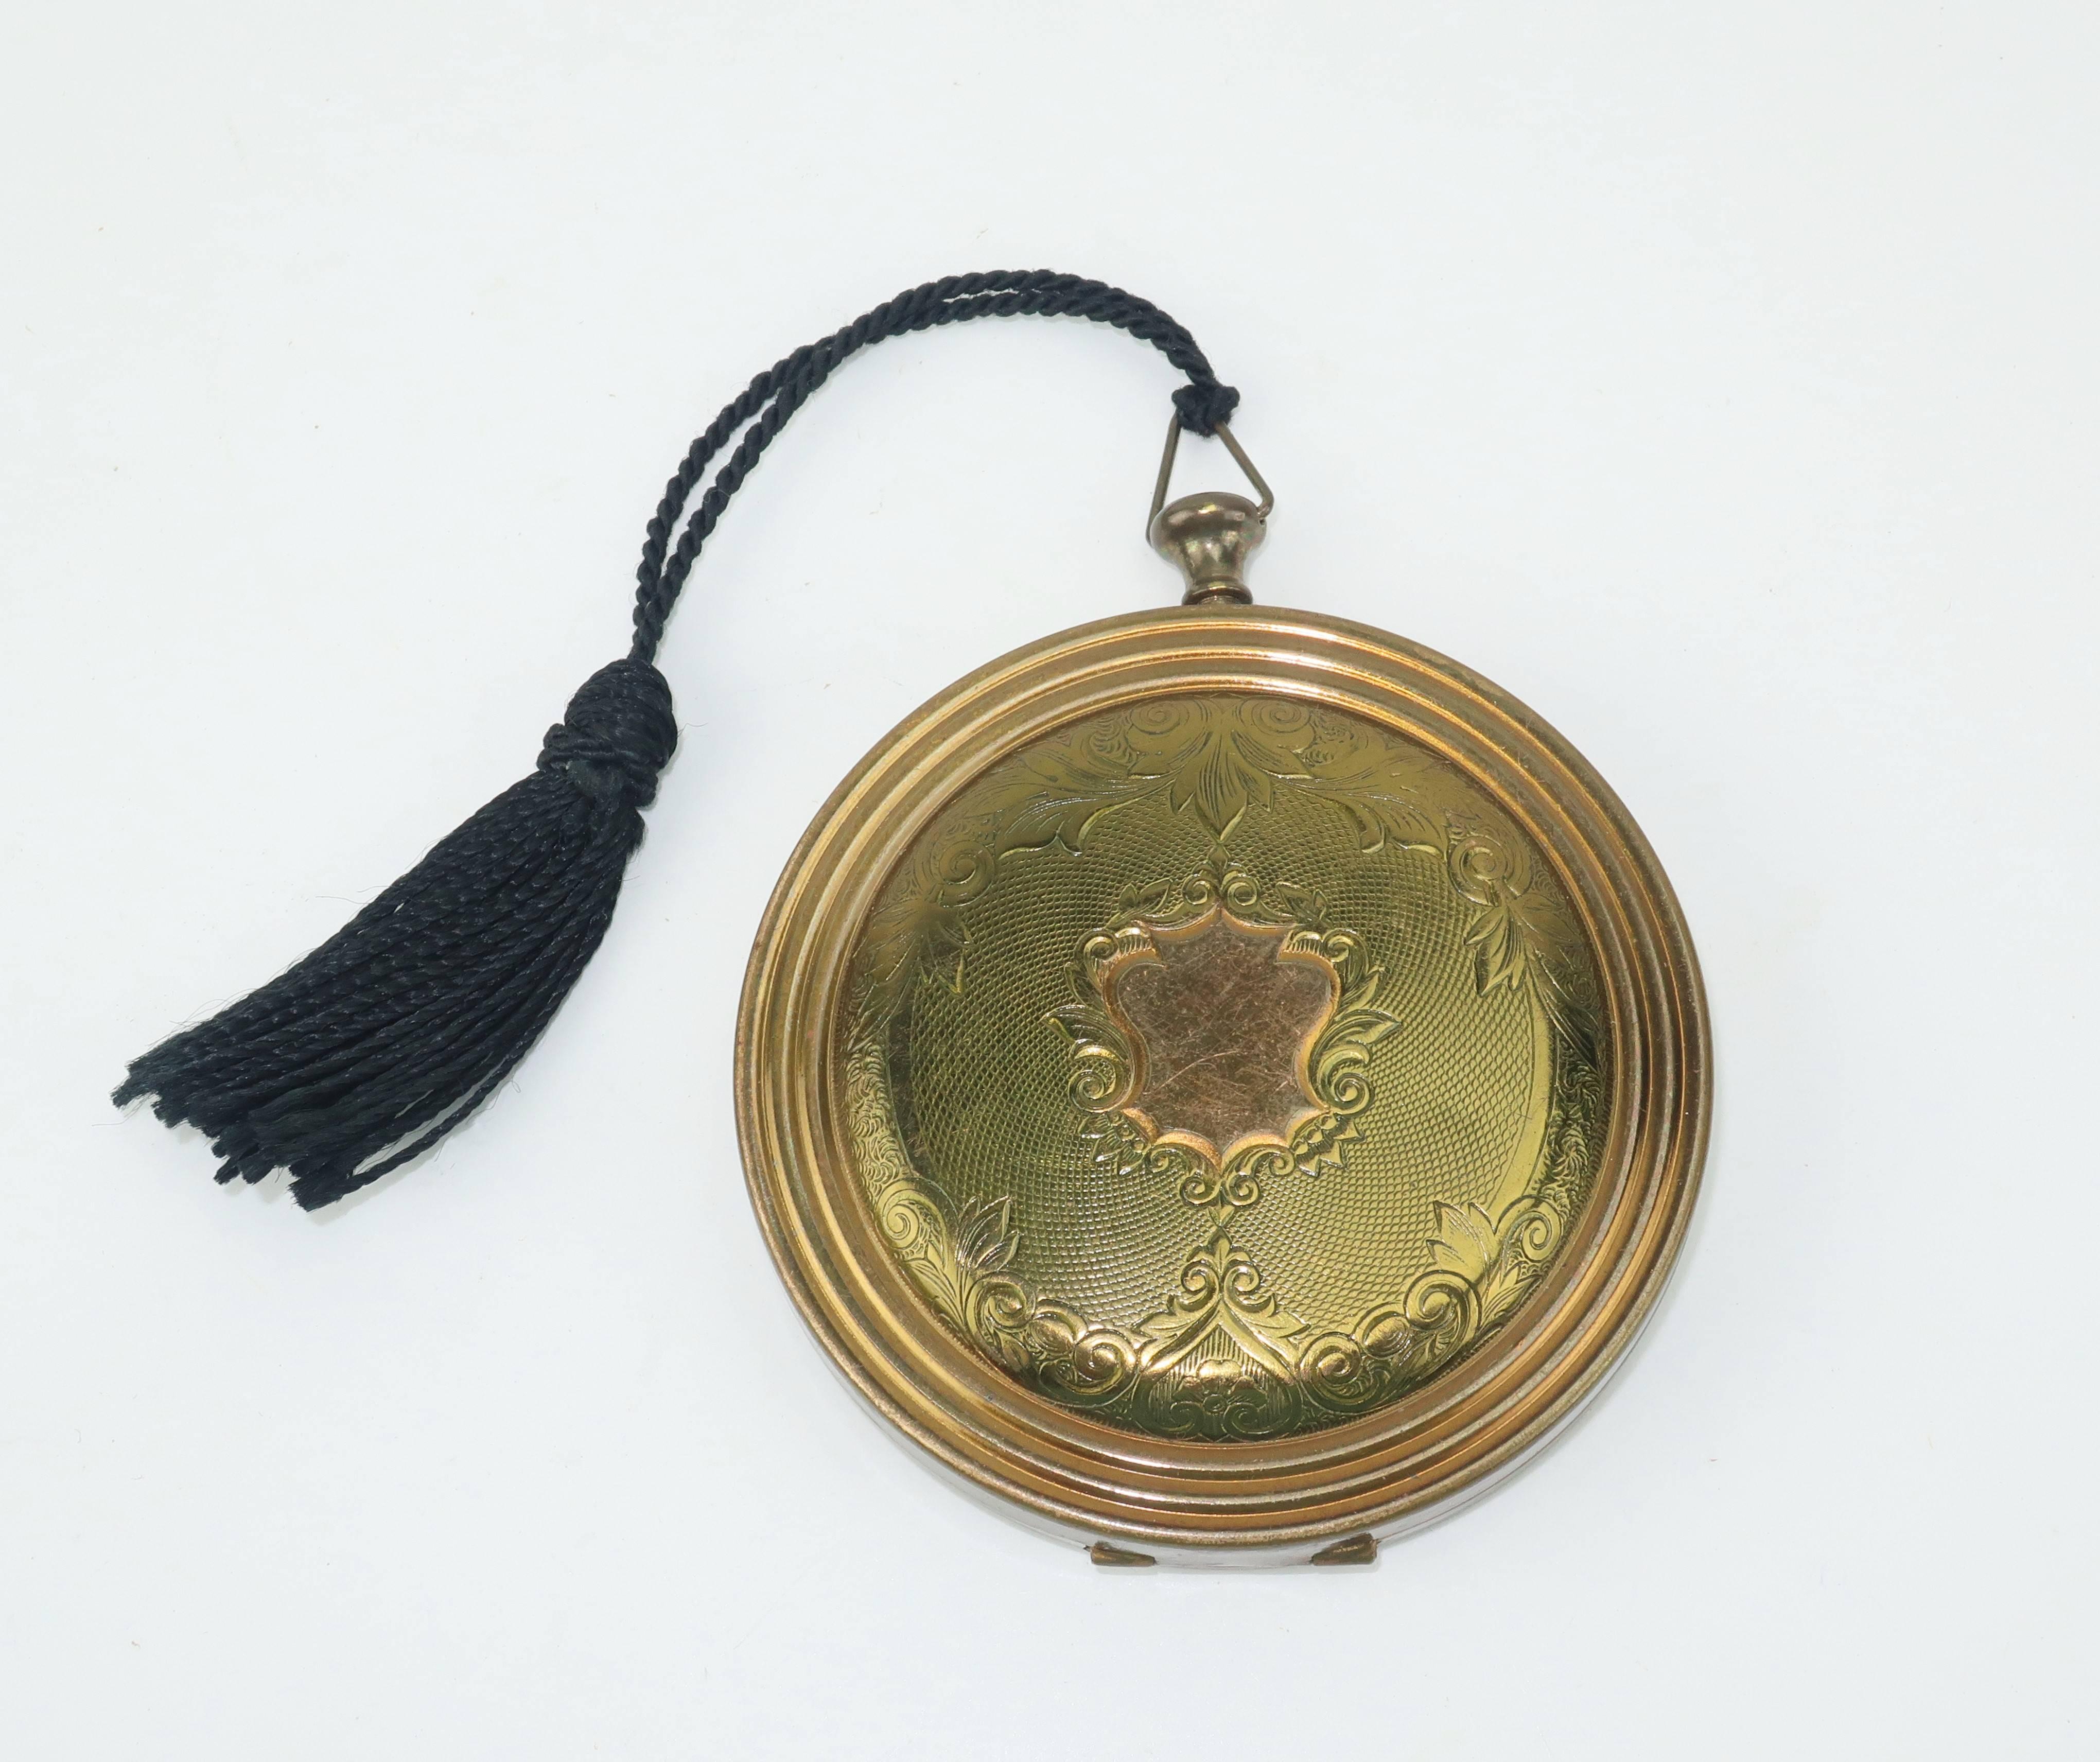 This unique Zell compact is designed to replicate a pocket watch complete with a push button ‘stem’.  The antique brass case has a Victorian era style machined decoration with a bullseye design on the back.  The interior displays a mirror, loose